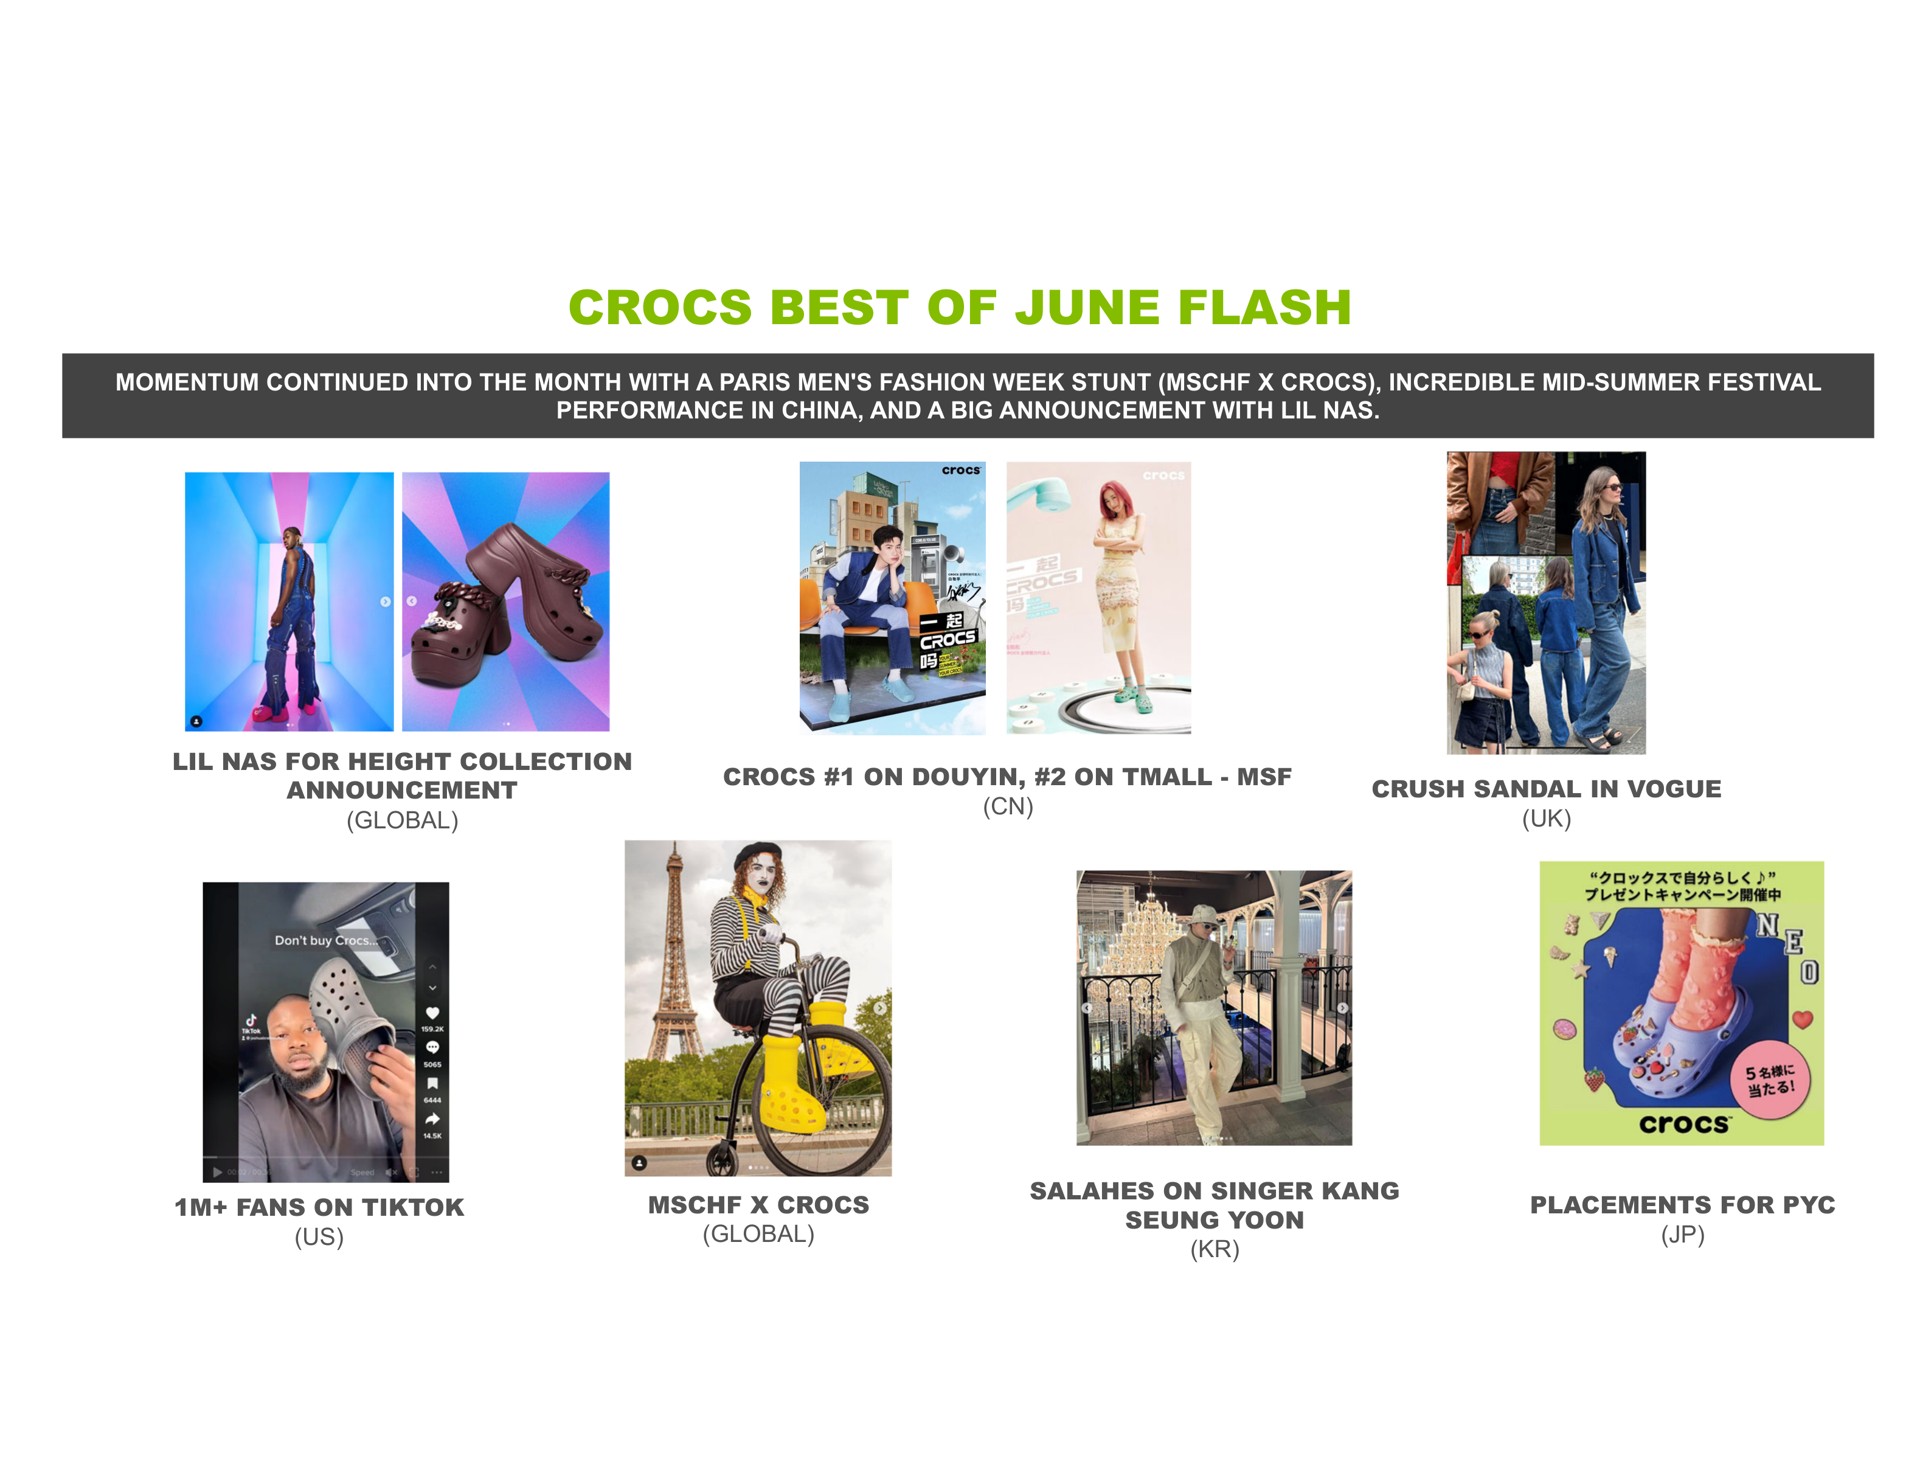 best of june flash nas for height collection announcement global fans on us global on singer kang placements for | Crocs